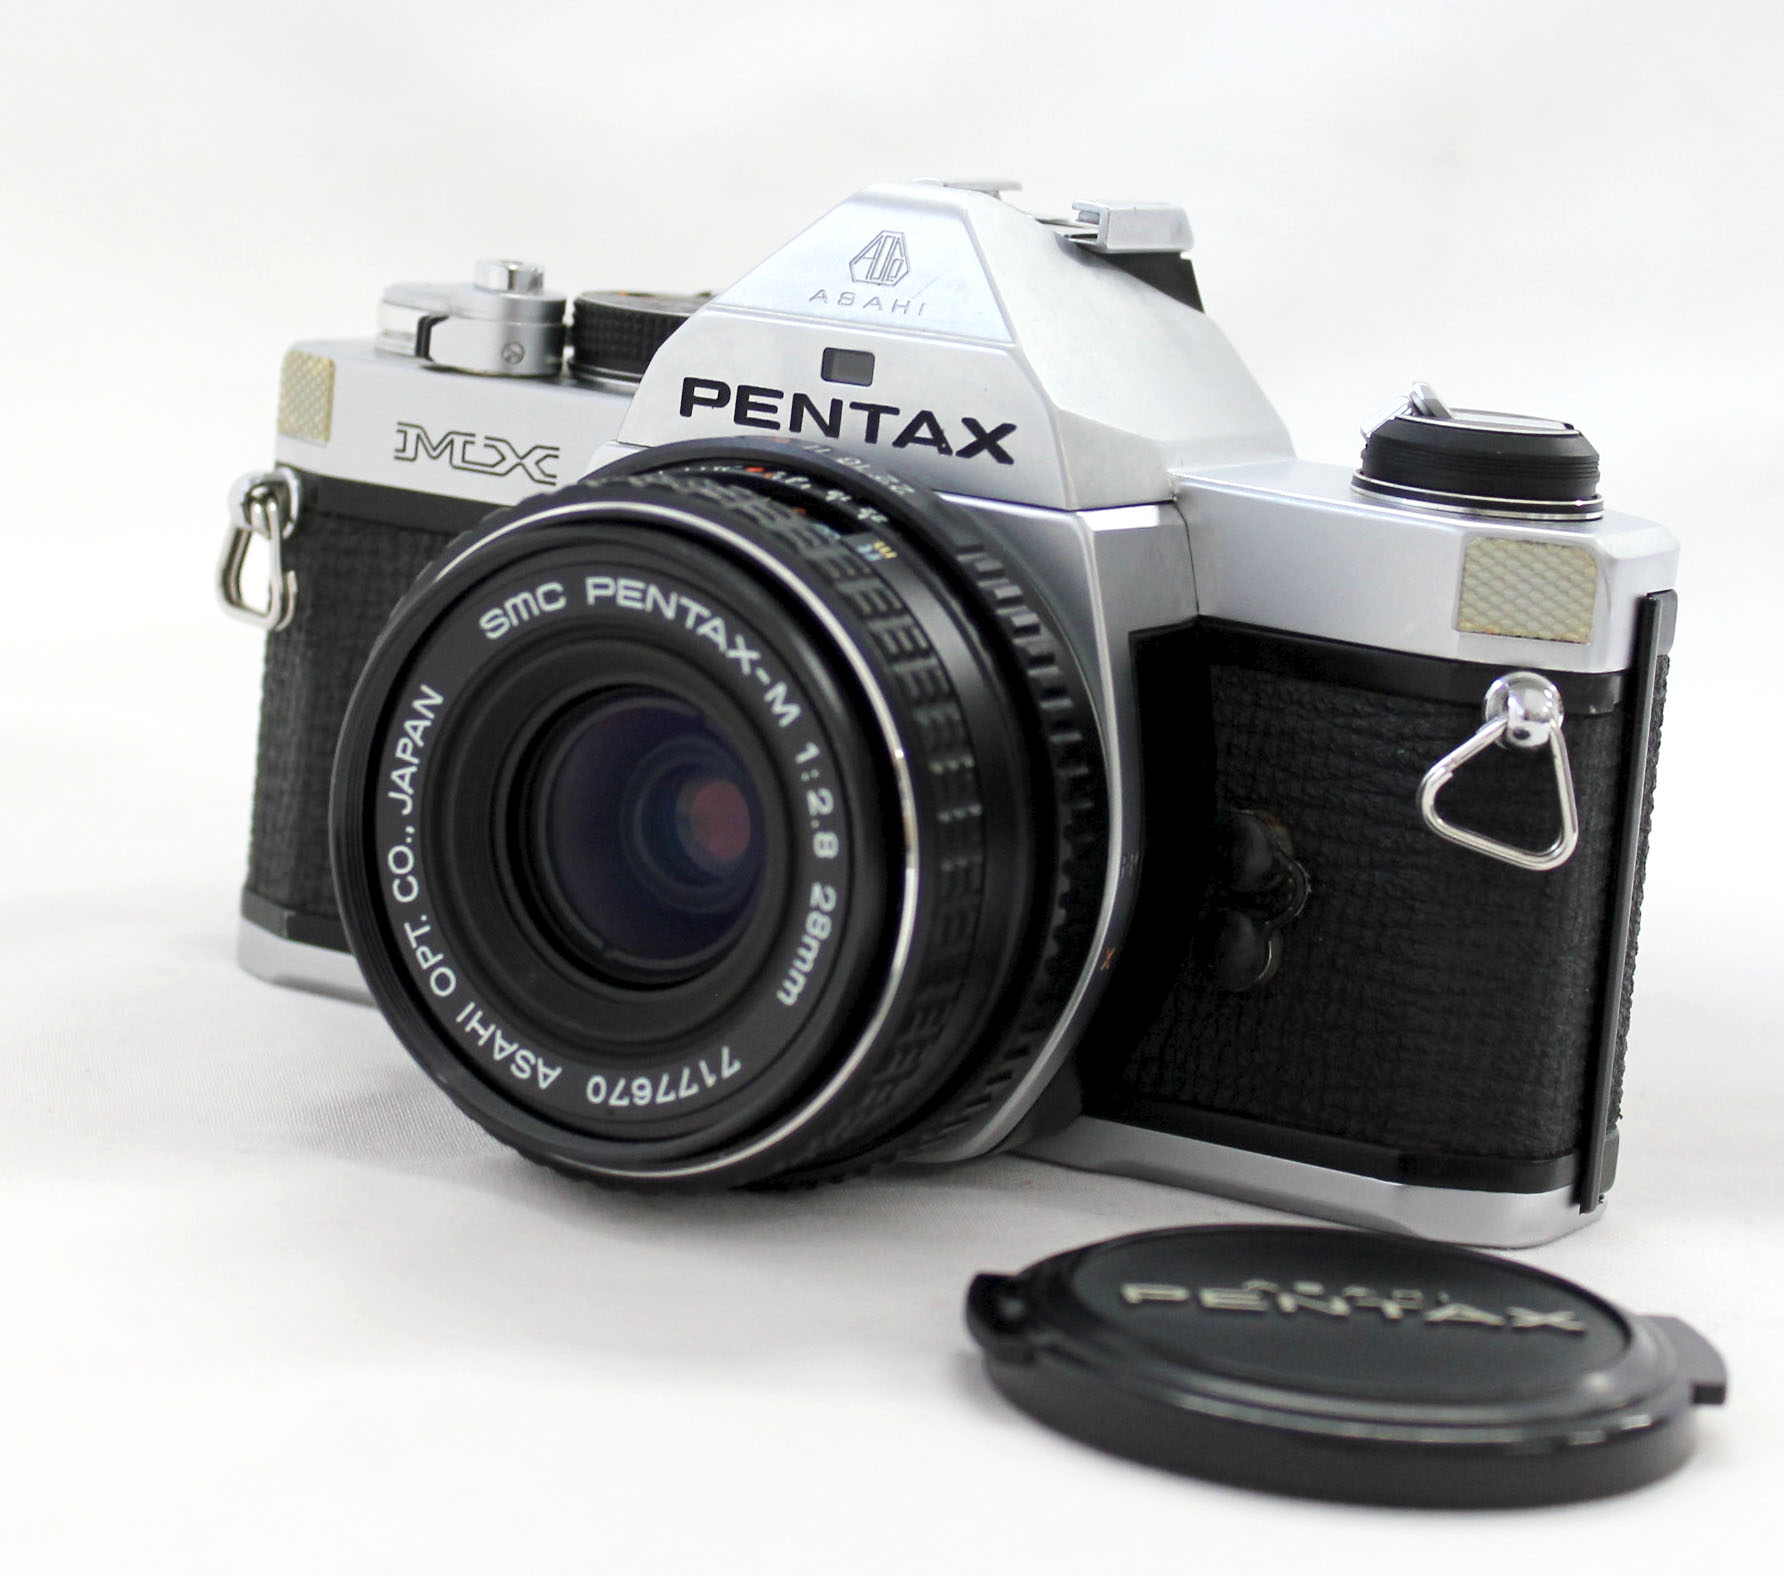 [Excellent++++] Pentax MX 35mm SLR Film Camera with SMC Pentax-M 28mm F/2.8 Lens from Japan